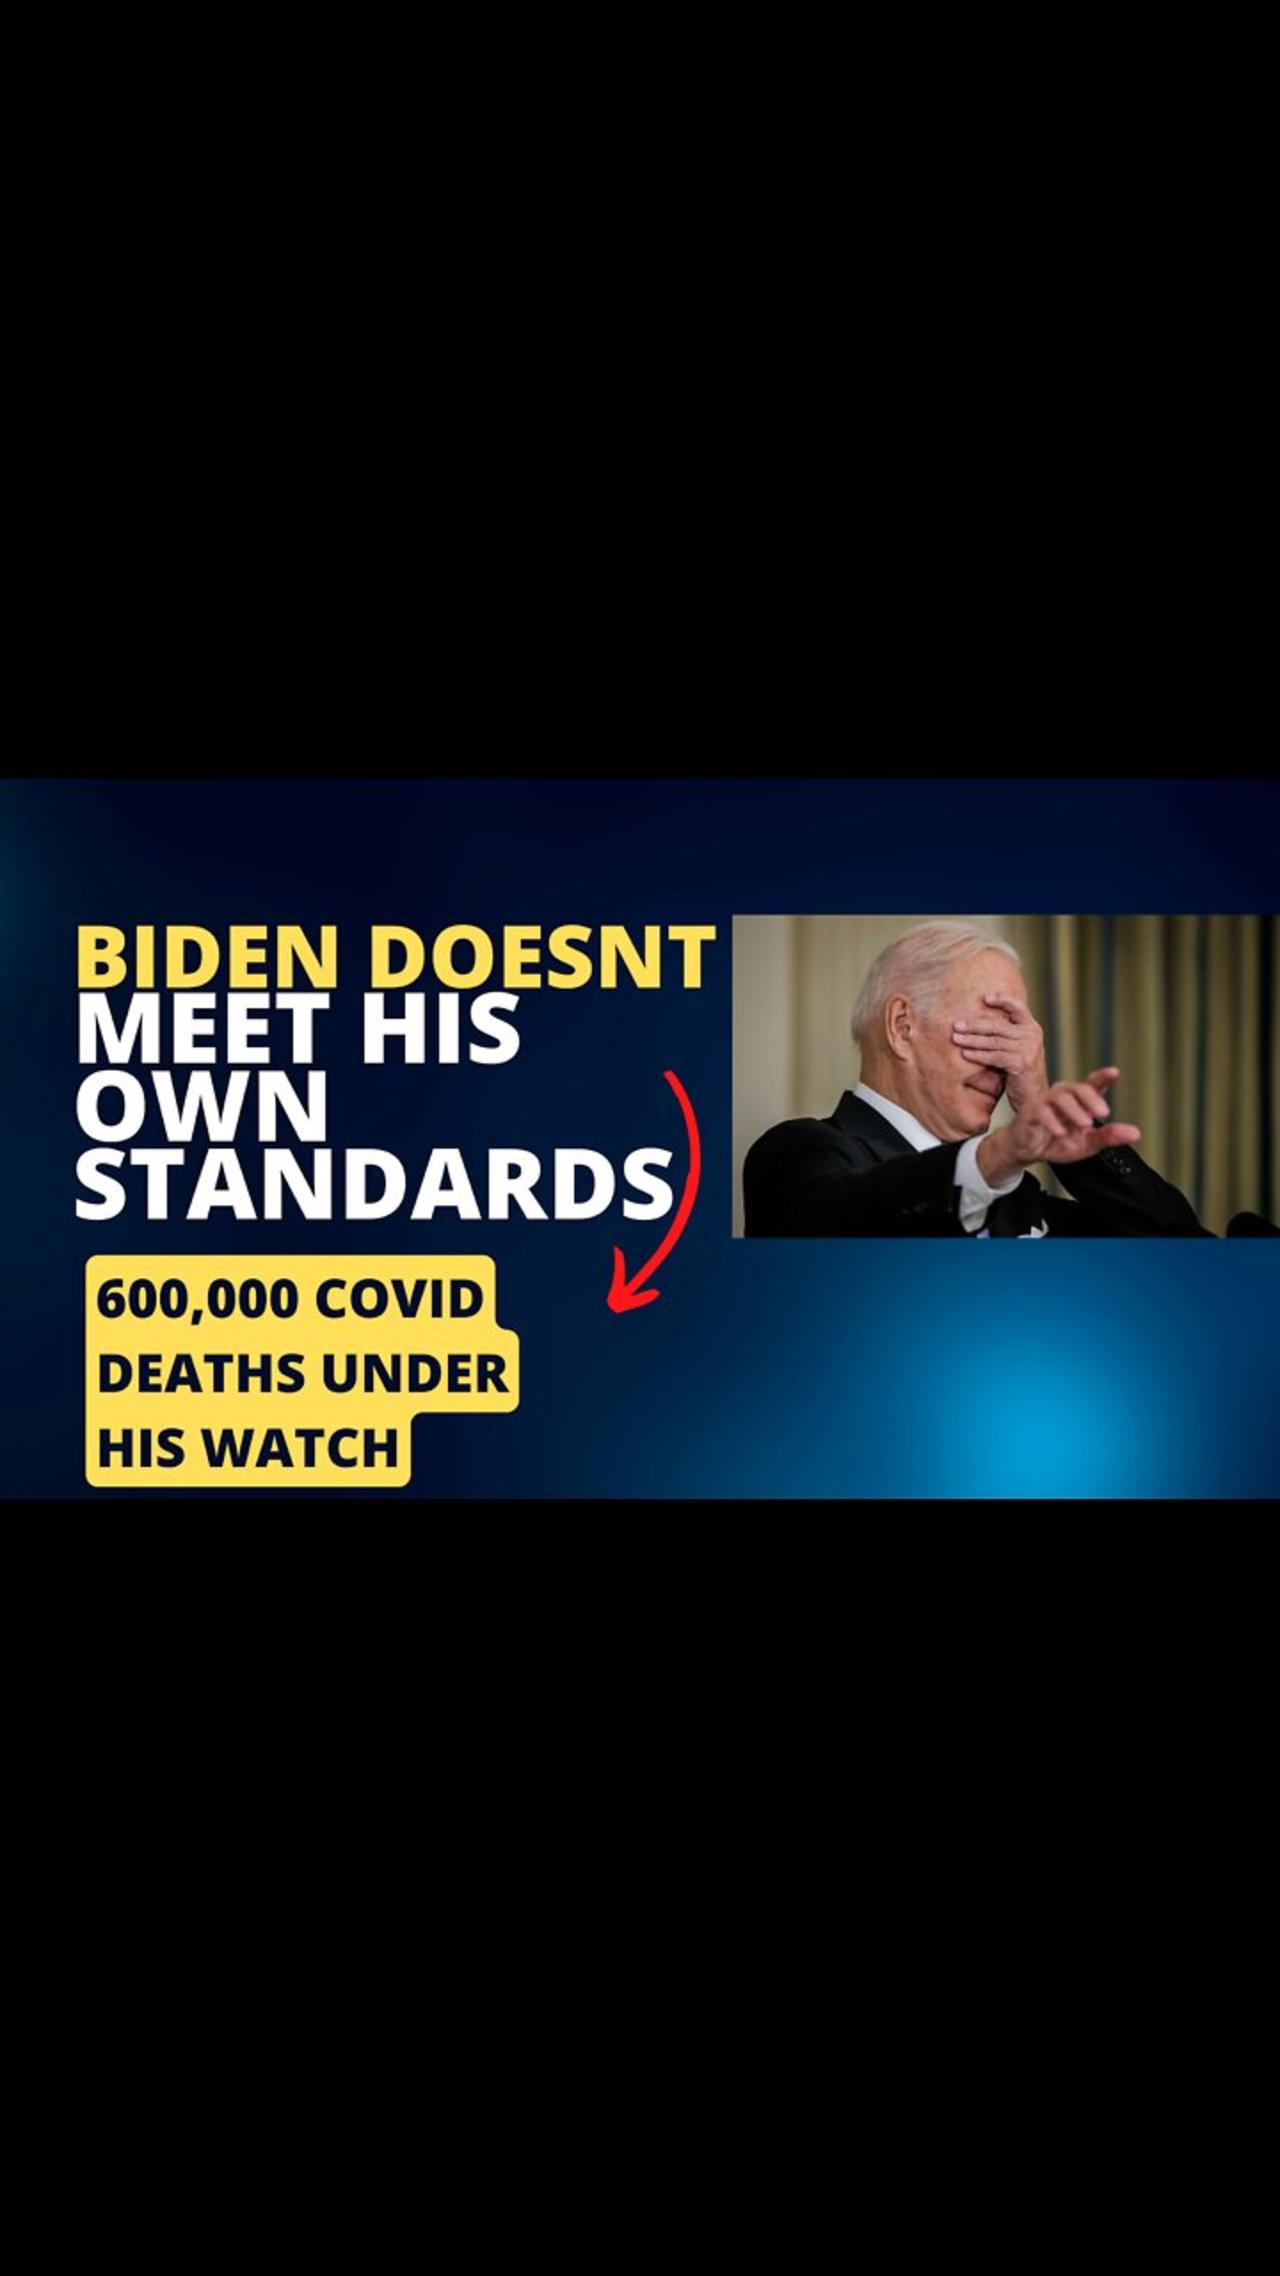 Biden Says Trump Shouldn’t Be President Based On Covid Deaths, But His Numbers Are WORSE